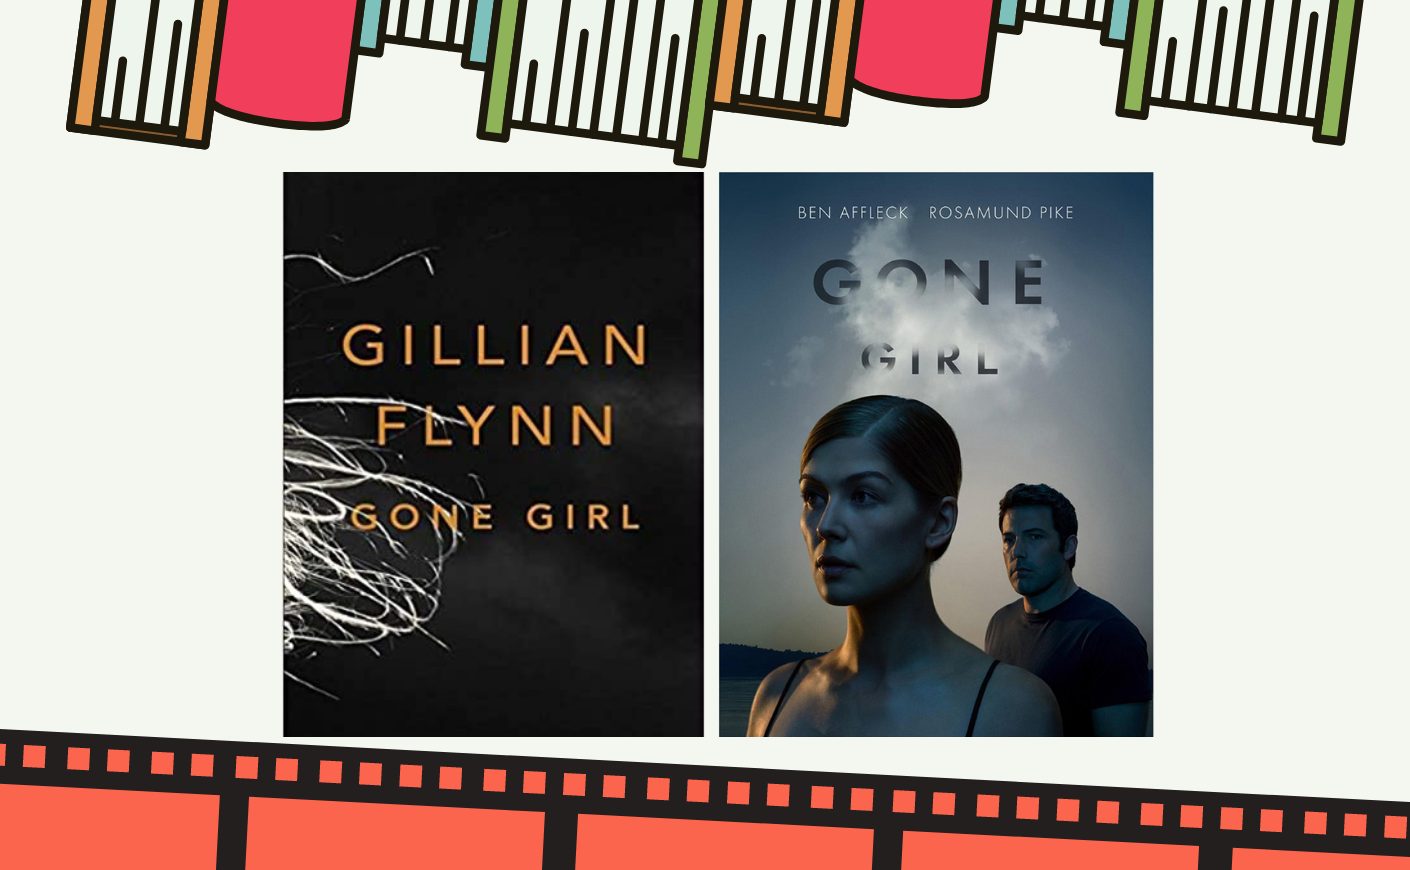 gone girl book next to gone girl movie poster